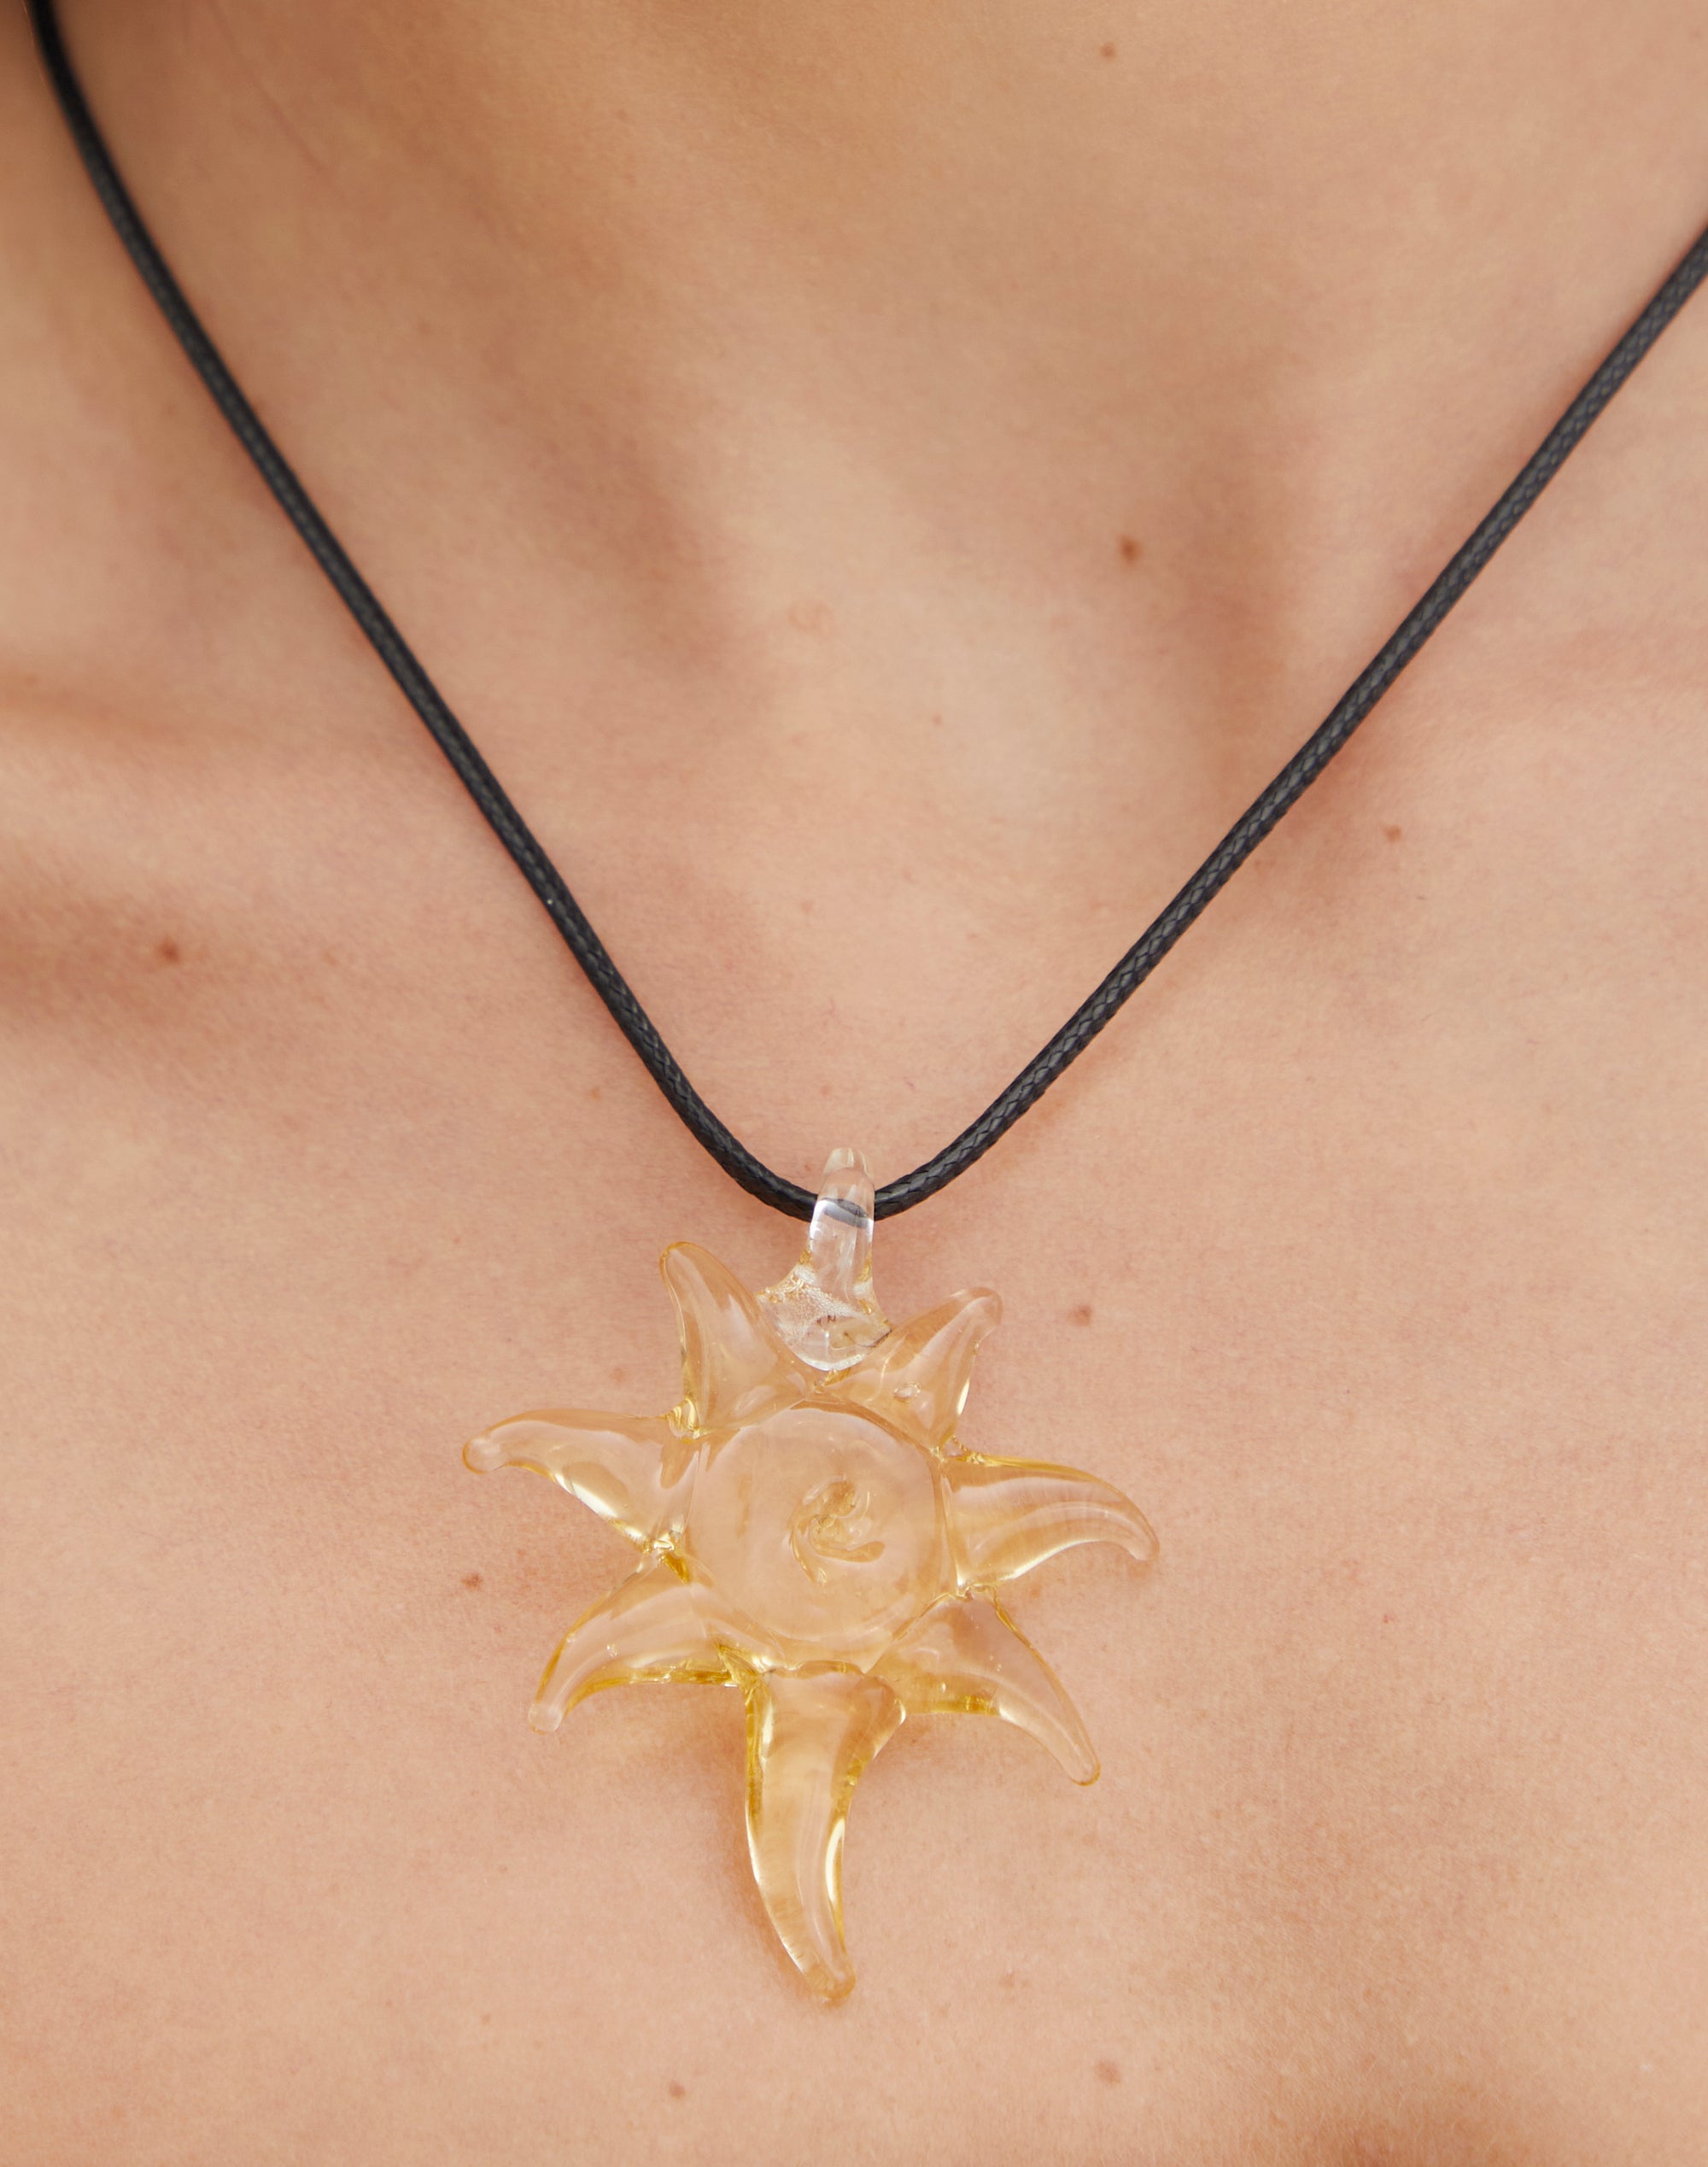 Tangled sun necklace | ShopLook